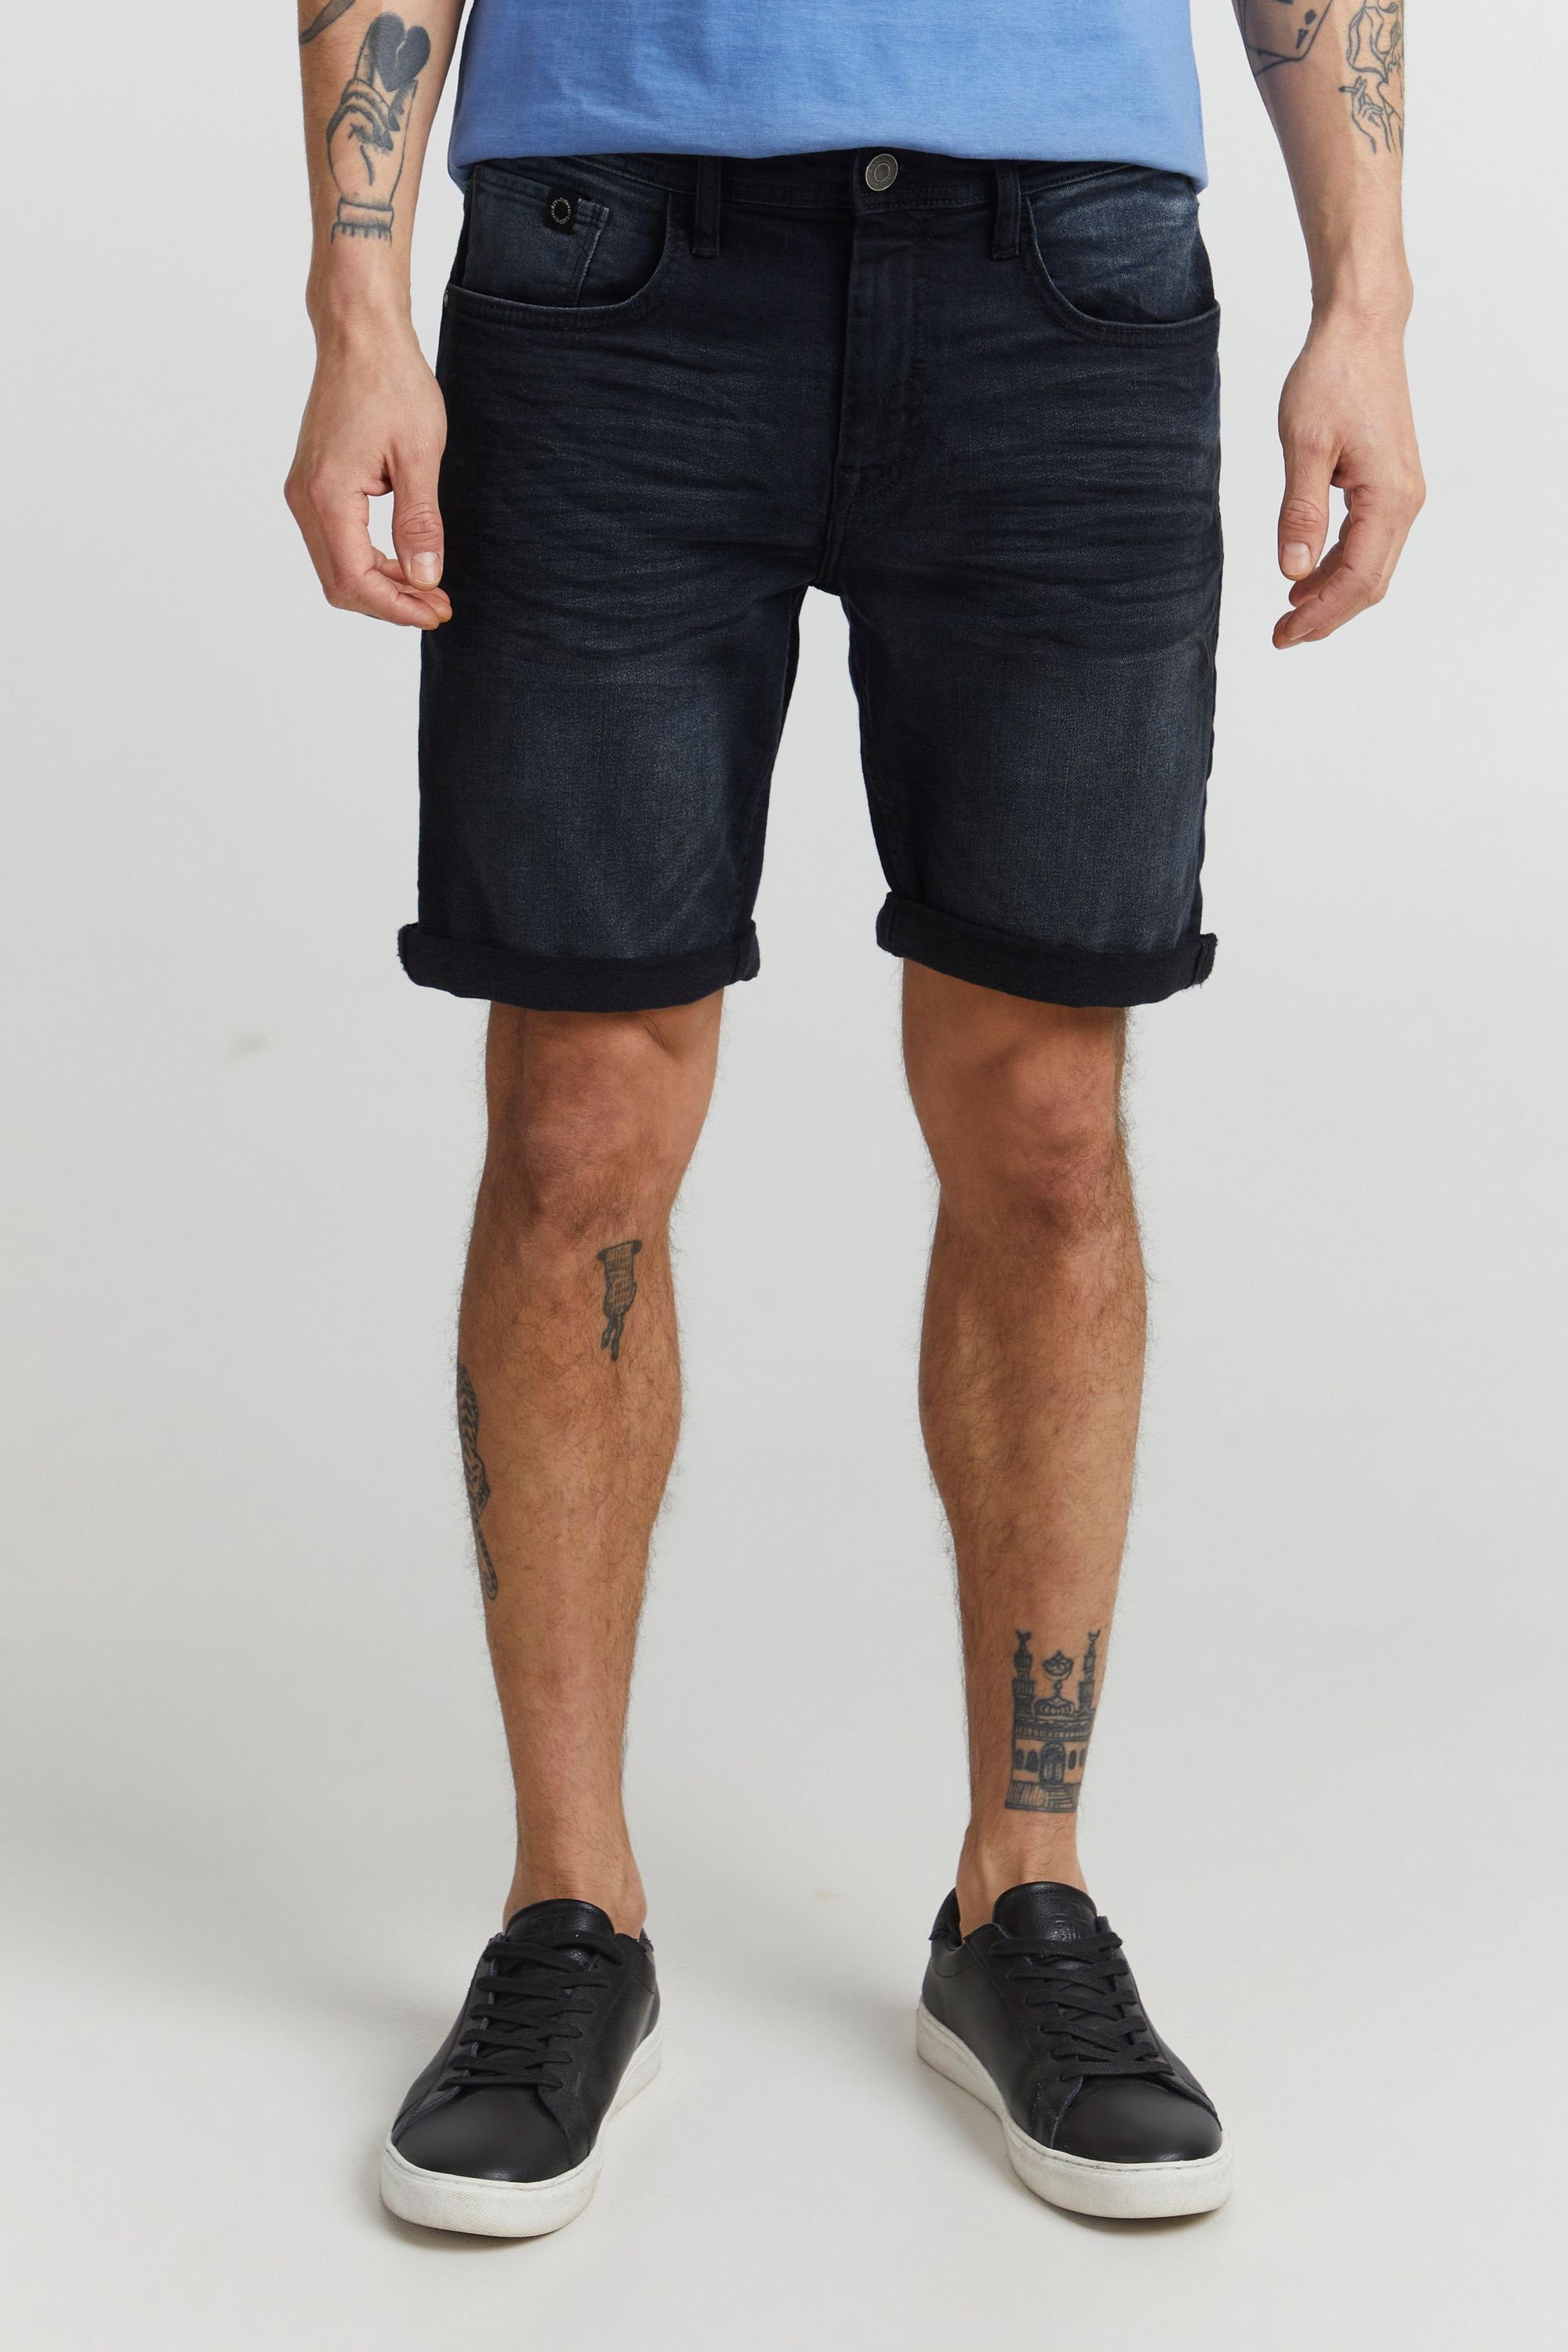 11 Project Denim Project Jeansshorts washed PRNias black 11